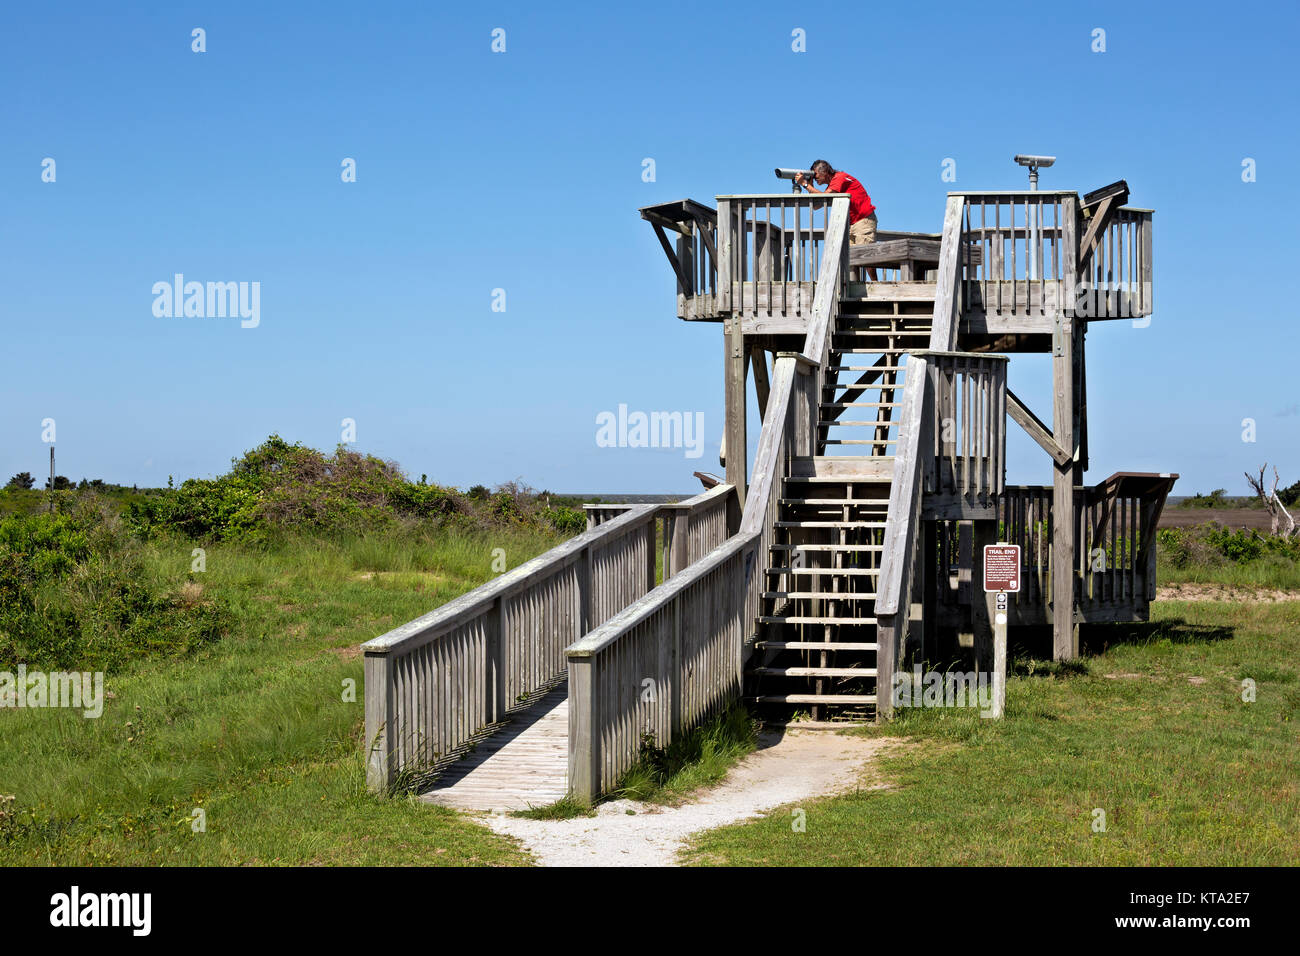 NC01158-00...NORTH CAROLINA - Trail at the Pea Island National Wildlife Refuge leads to tall viewing platform with viewing scopes overlooking the salt Stock Photo